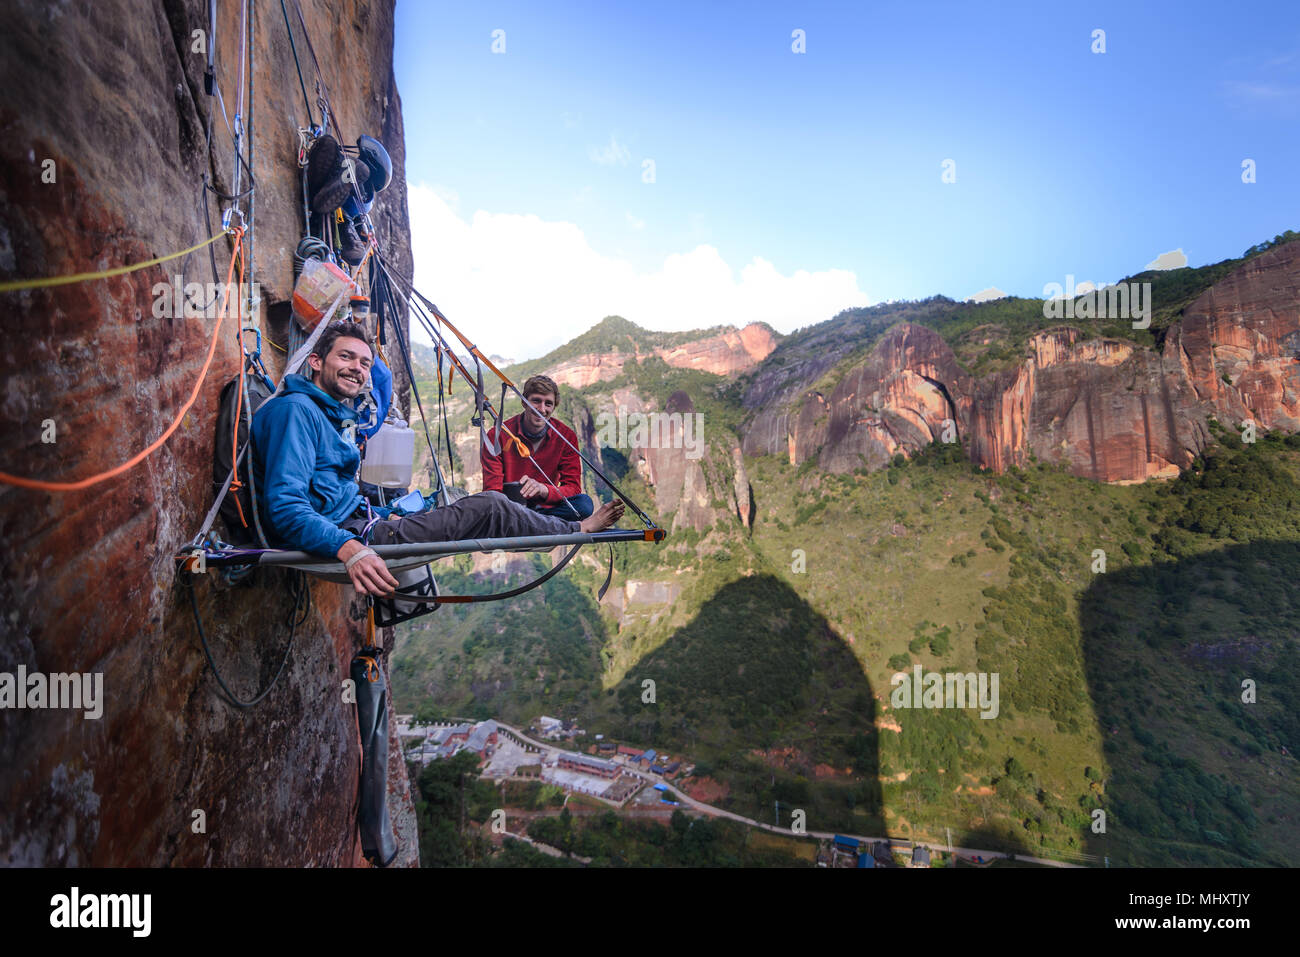 Portrait of two rock climbers on portaledge, Liming, Yunnan Province, China Stock Photo